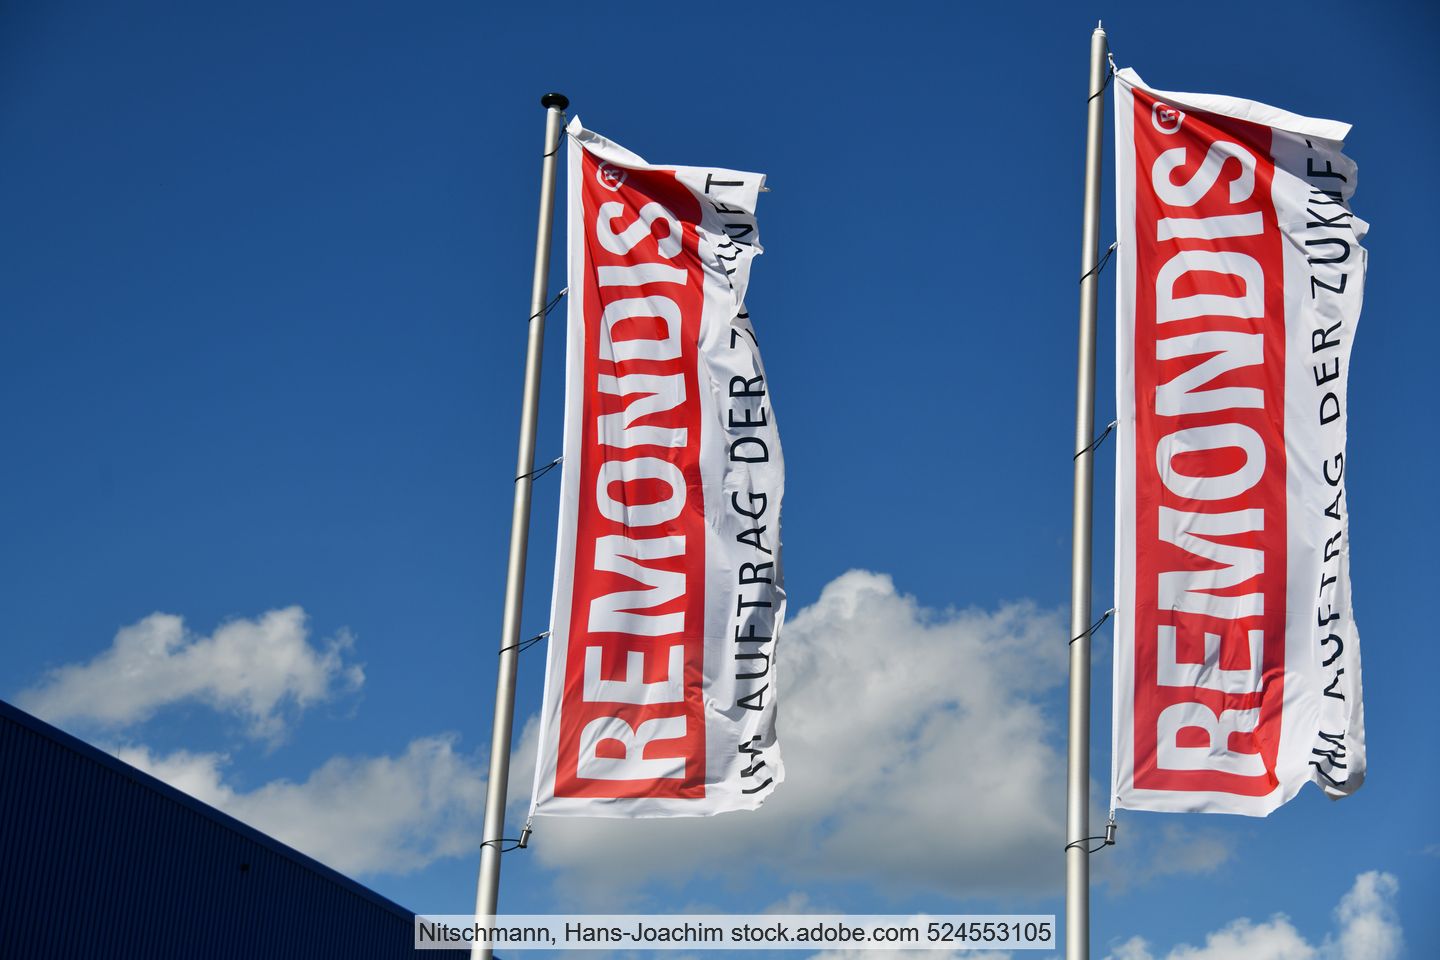 Two Remondis flags with concern logo and tagline fly against a blue sky with clouds